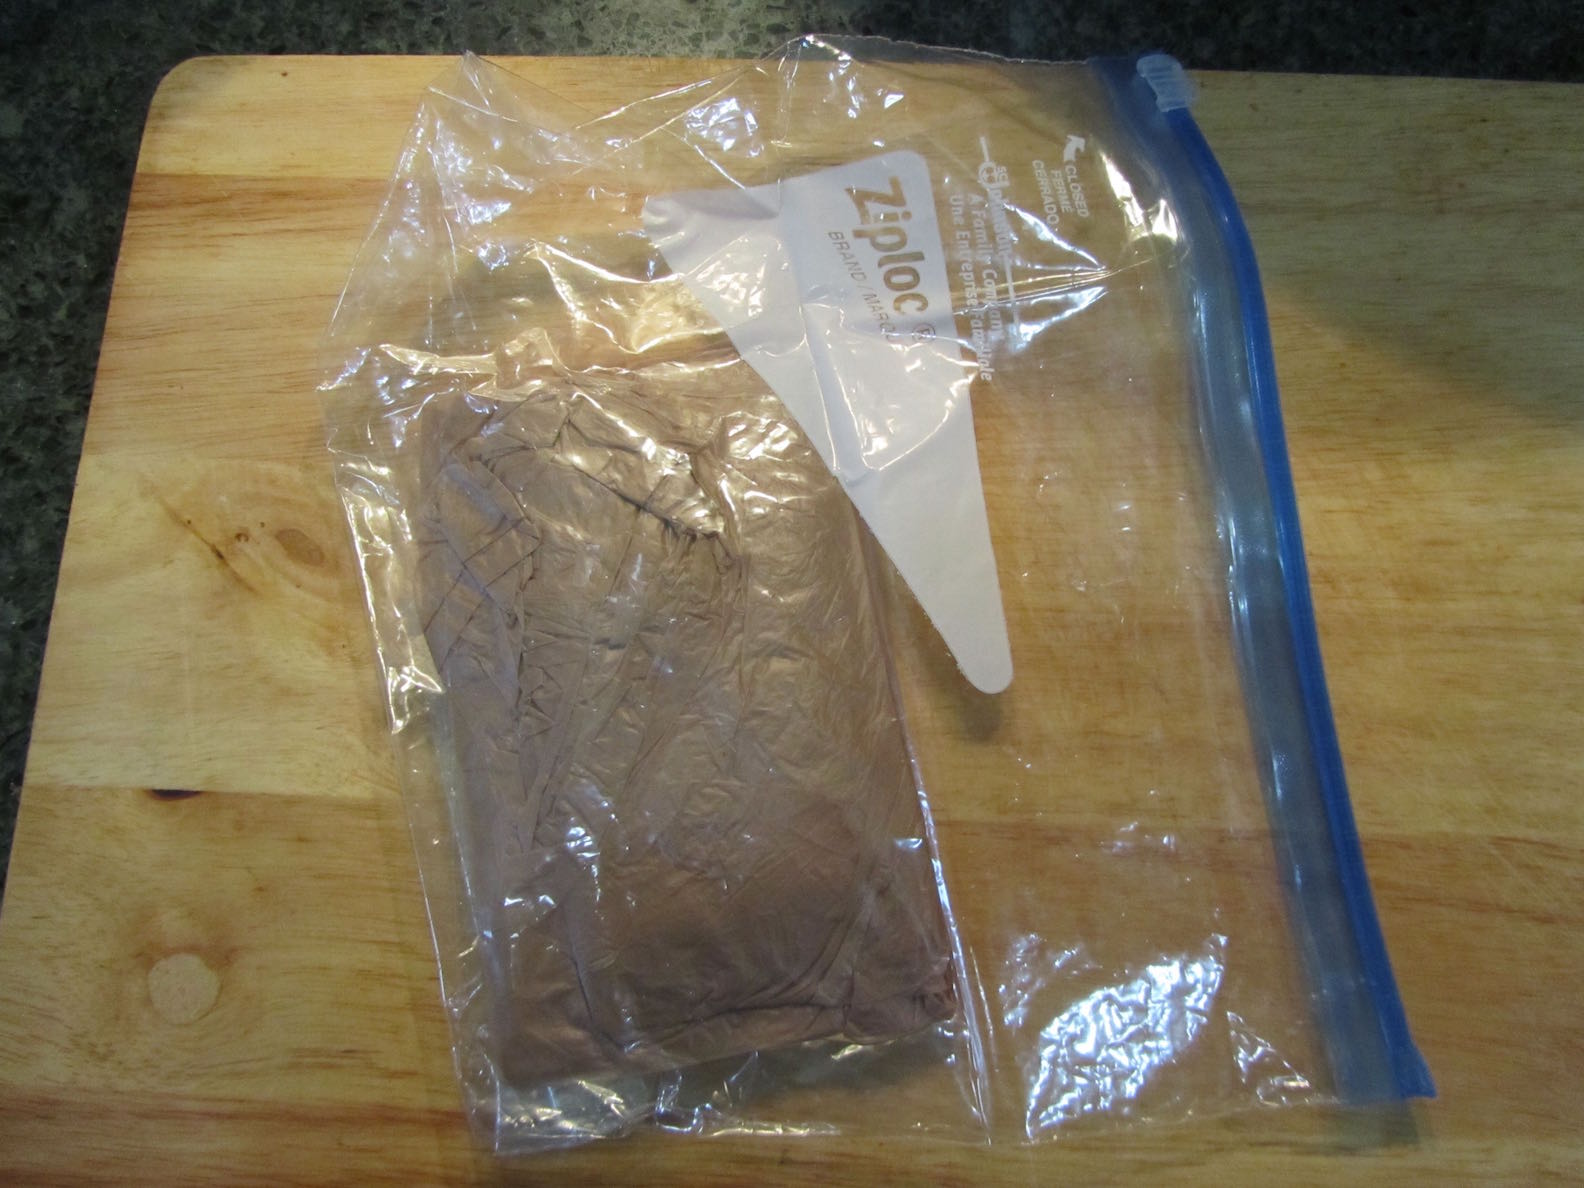 creative savv: How do you store previously-used Ziploc bags?